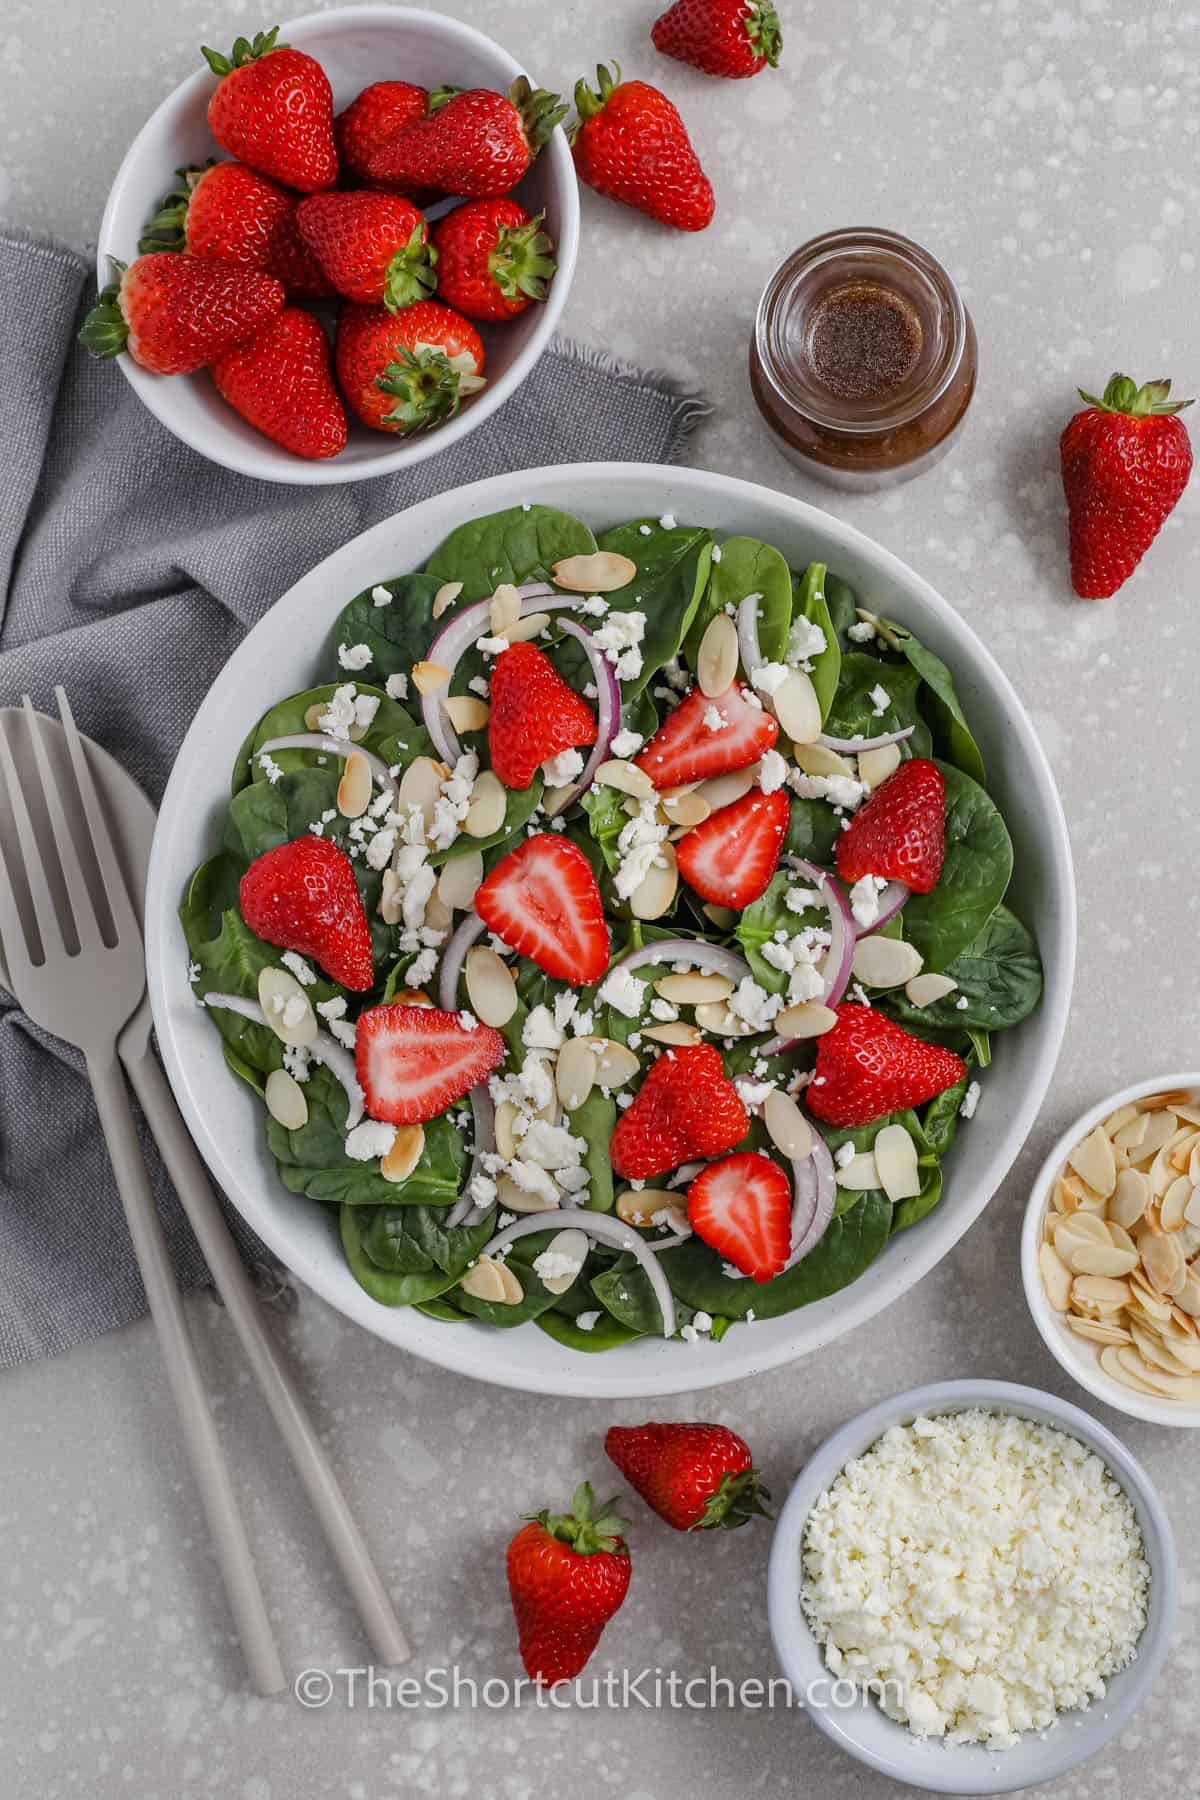 Spinach and Strawberry Salad in a white bowl surrounded by feta cheese, almonds, strawberries and dressing